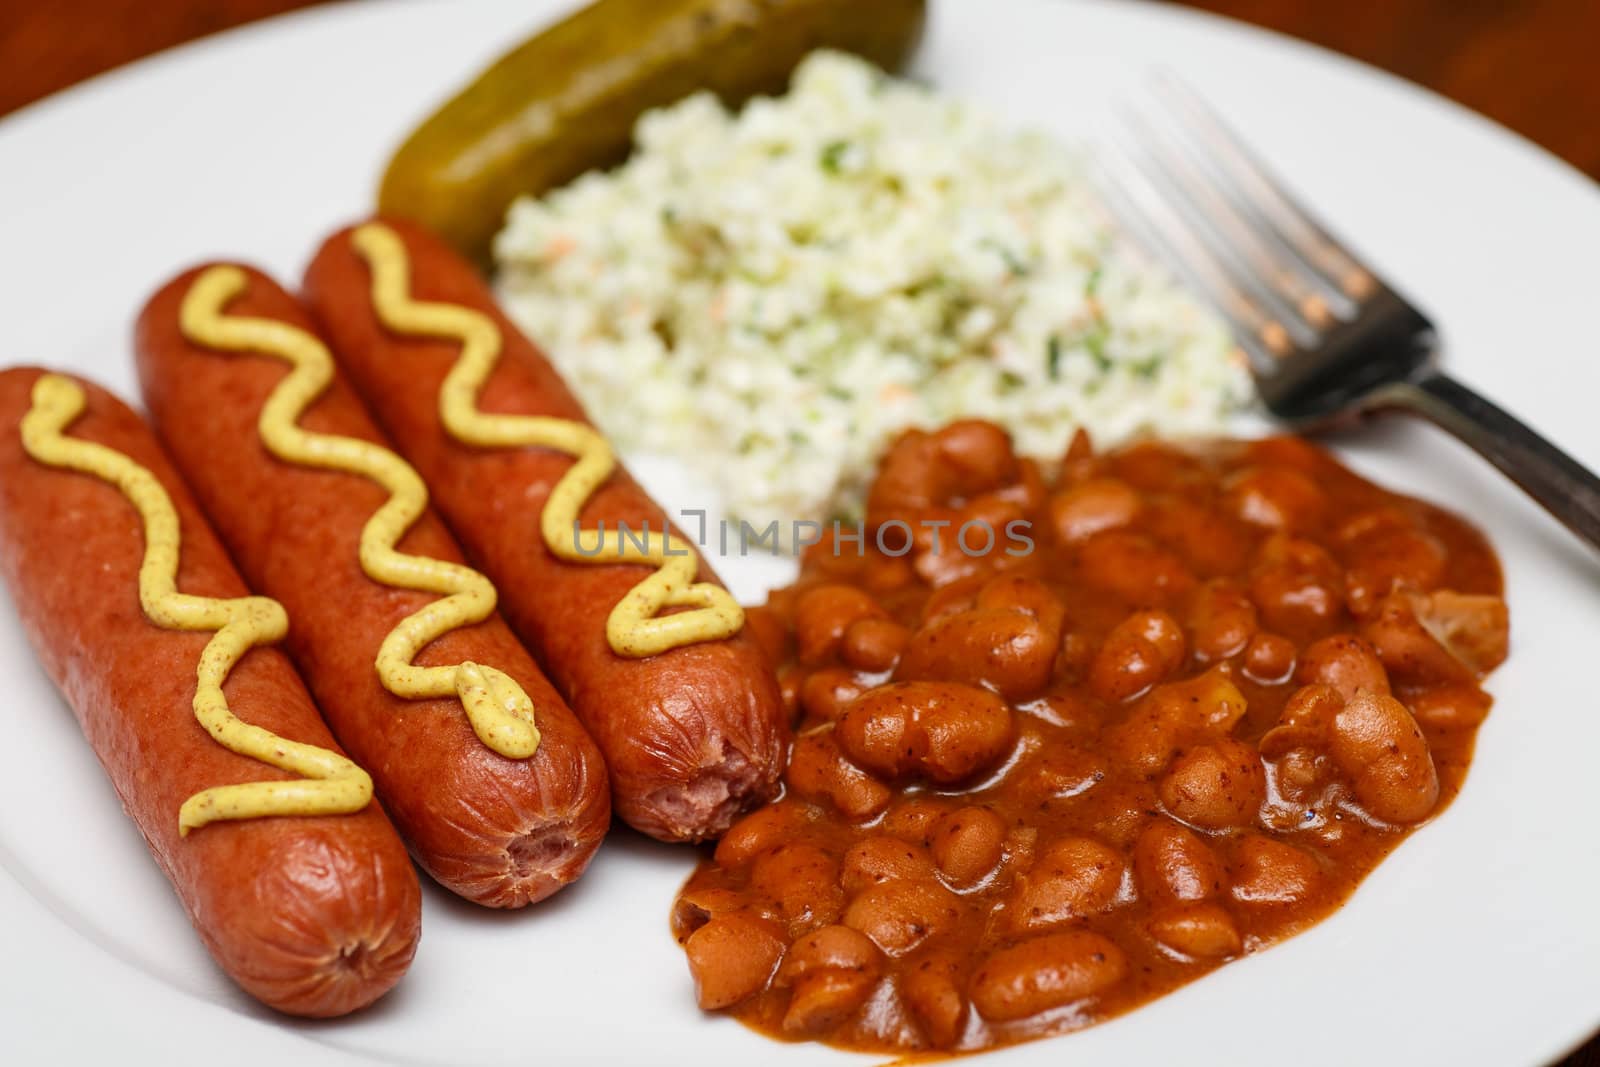 A lunch of franks and beans with cole slaw and a pickle